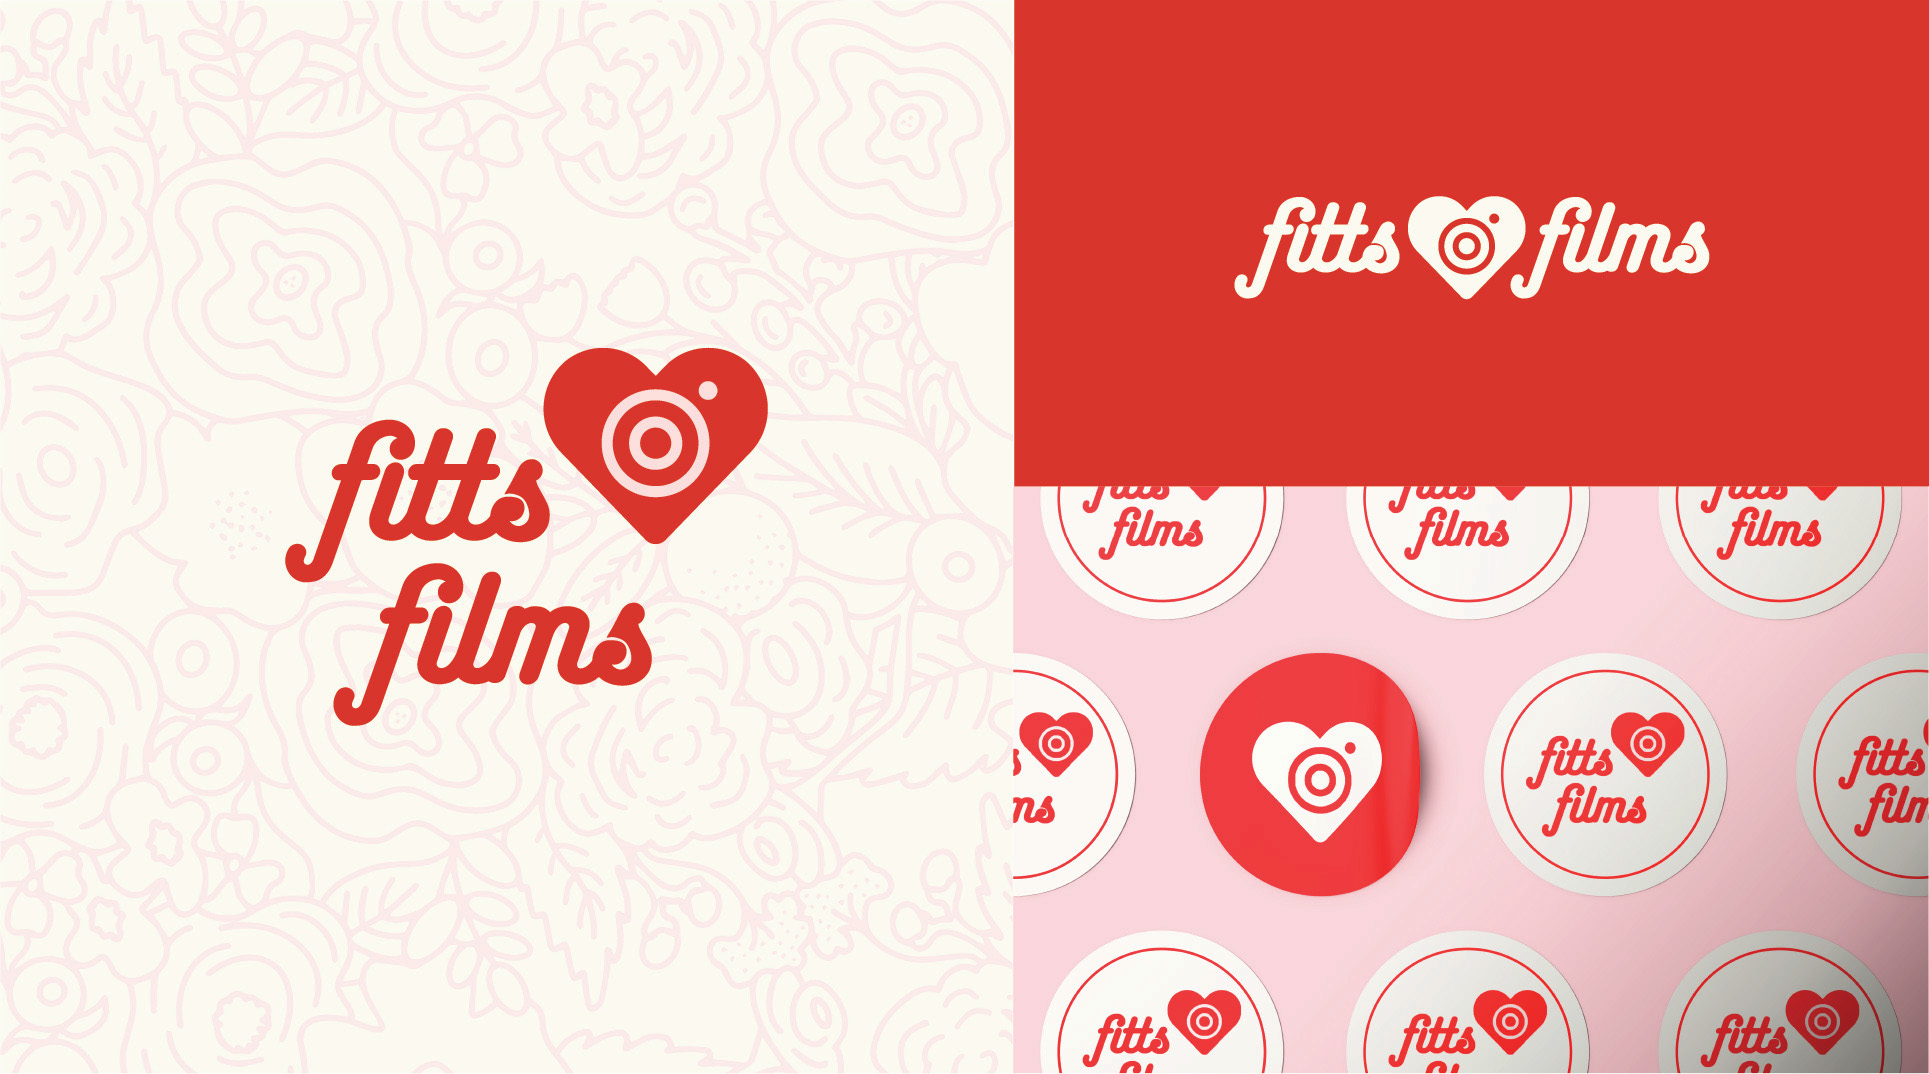 Fitts Films / “Fitts Films,” Wedding Videographer Branding Project, 2022. This branding project uses delicate floral patterns, romantic colors, and a modern-vintage design approach to create an identity for a wedding videographer that is personable, out-going, and effective. 